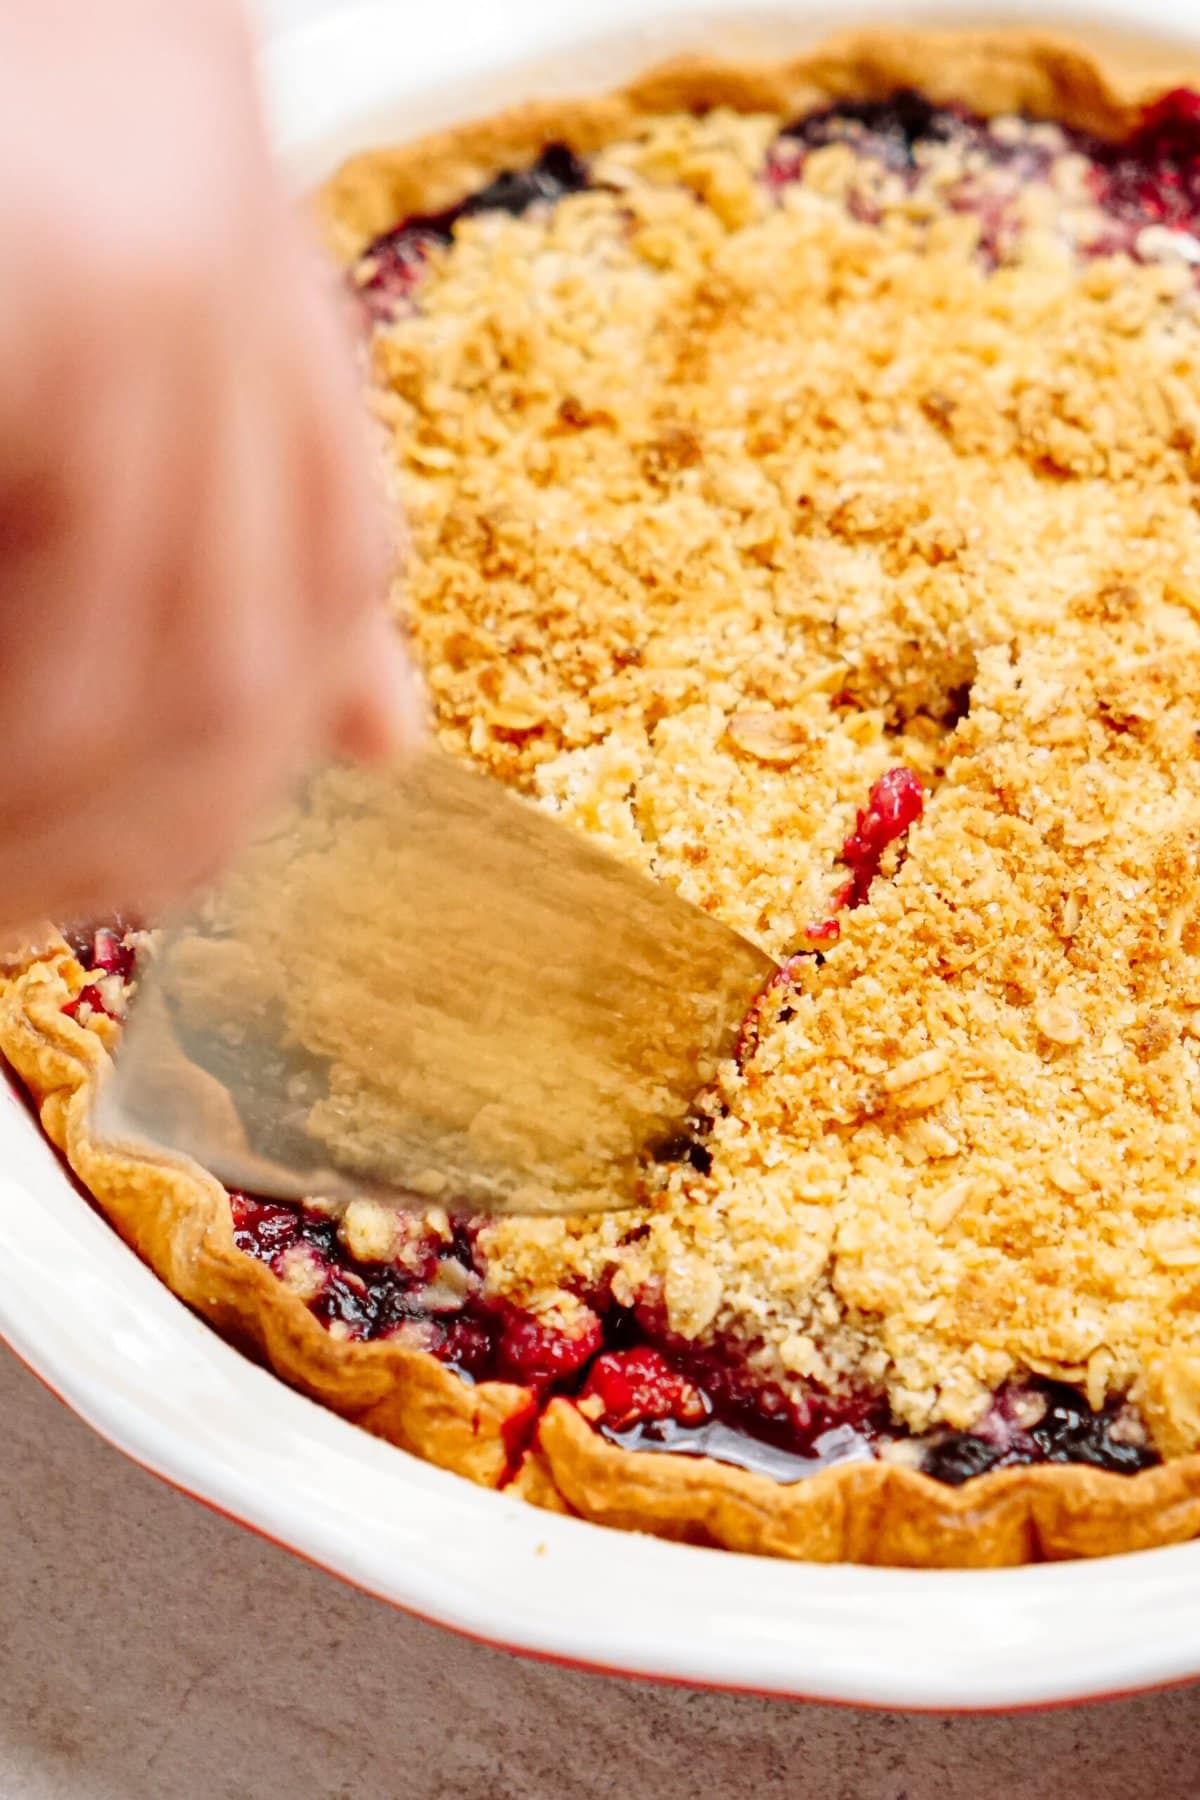 A hand using a metal spatula to slice into a berry crumble pie with a golden crumb topping.